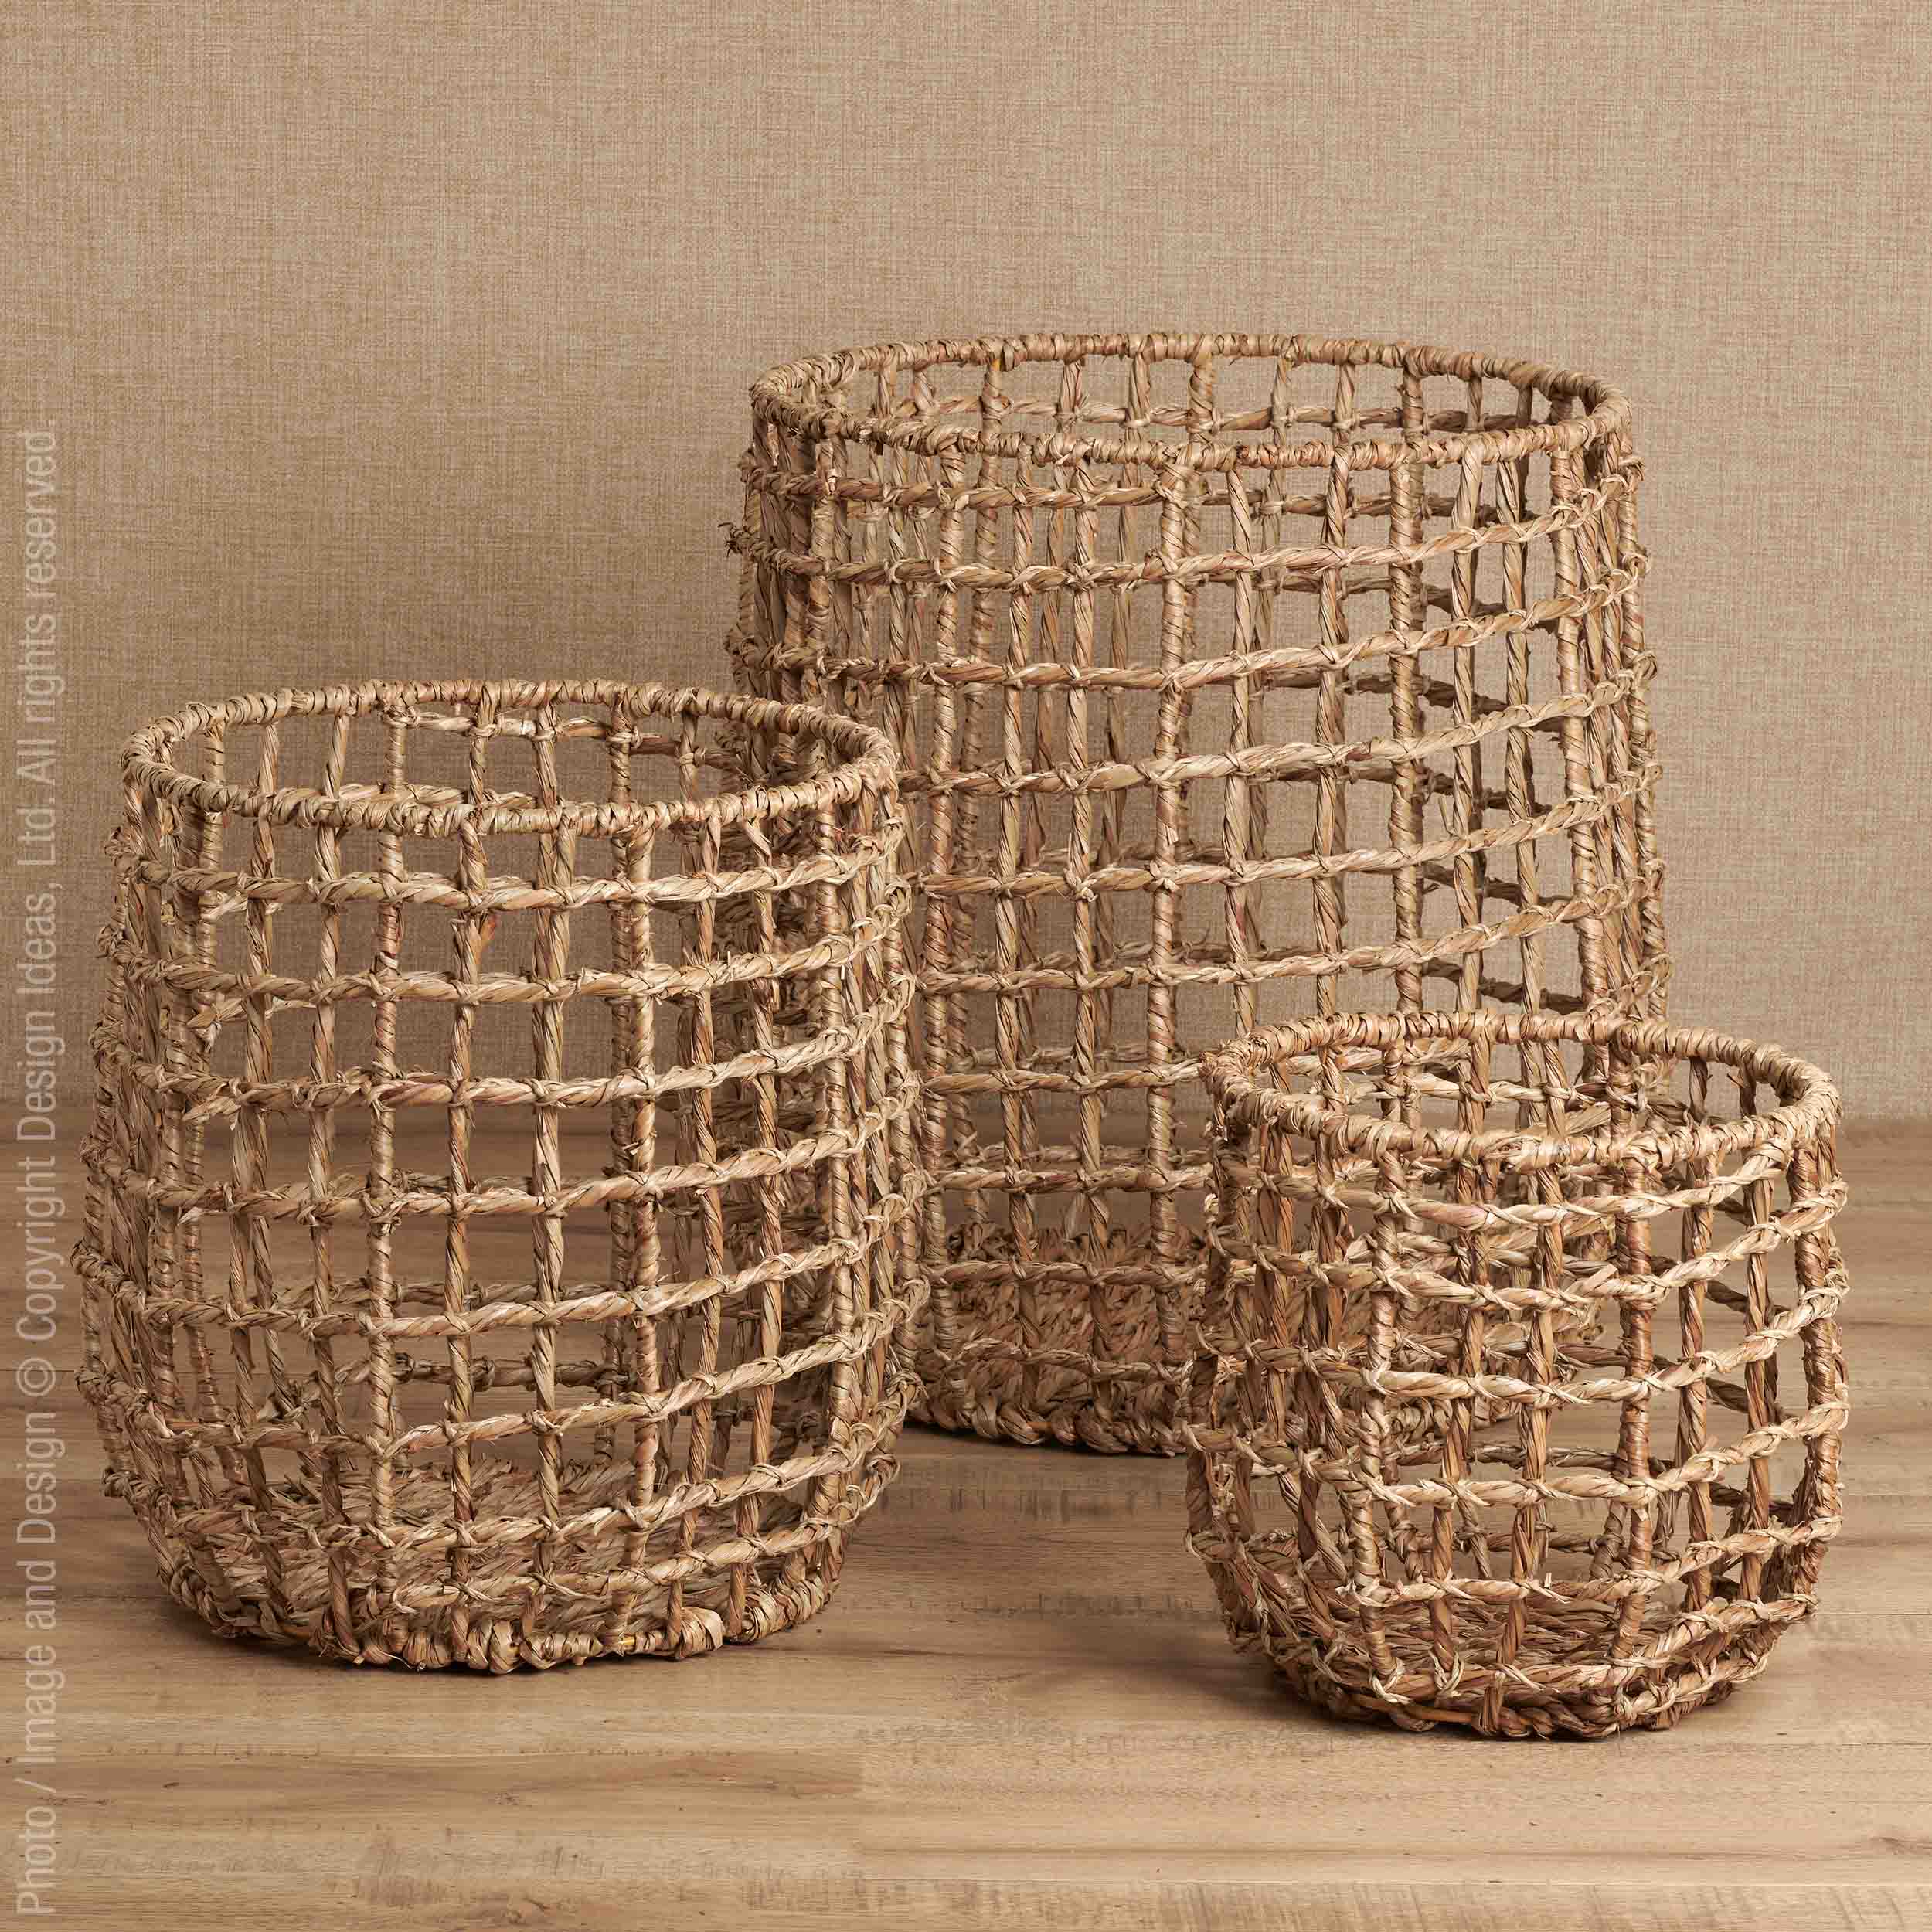 Ancona™ baskets - Natural | Image 1 | Premium Basket from the Ancona collection | made with Water Hyacinth Twine for long lasting use | texxture